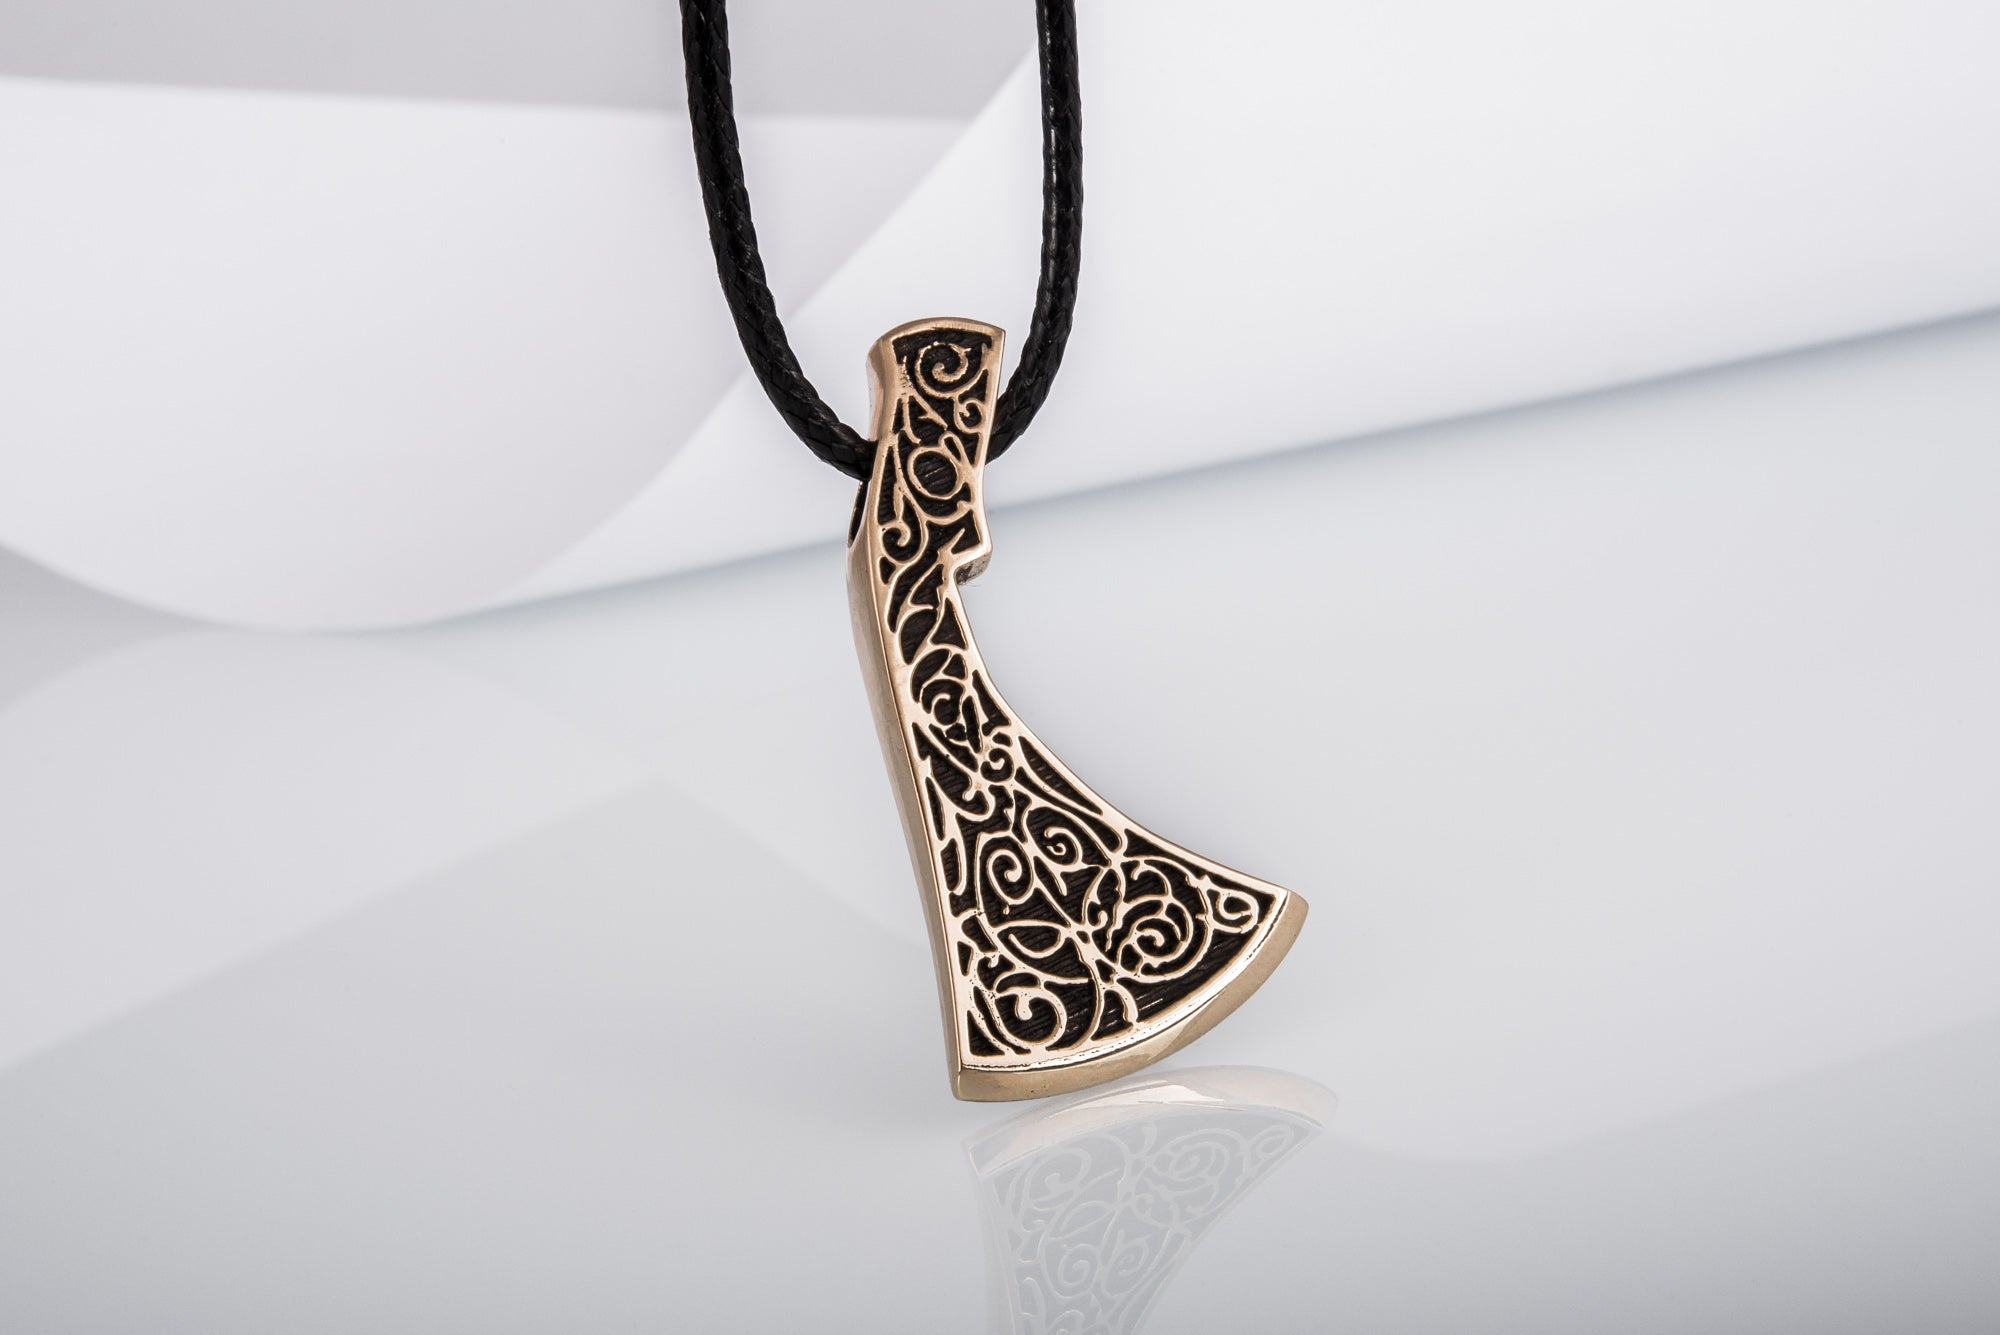 Perun's Axe Bronze Pendant with Beautiful Floral Ornament Reconstruction